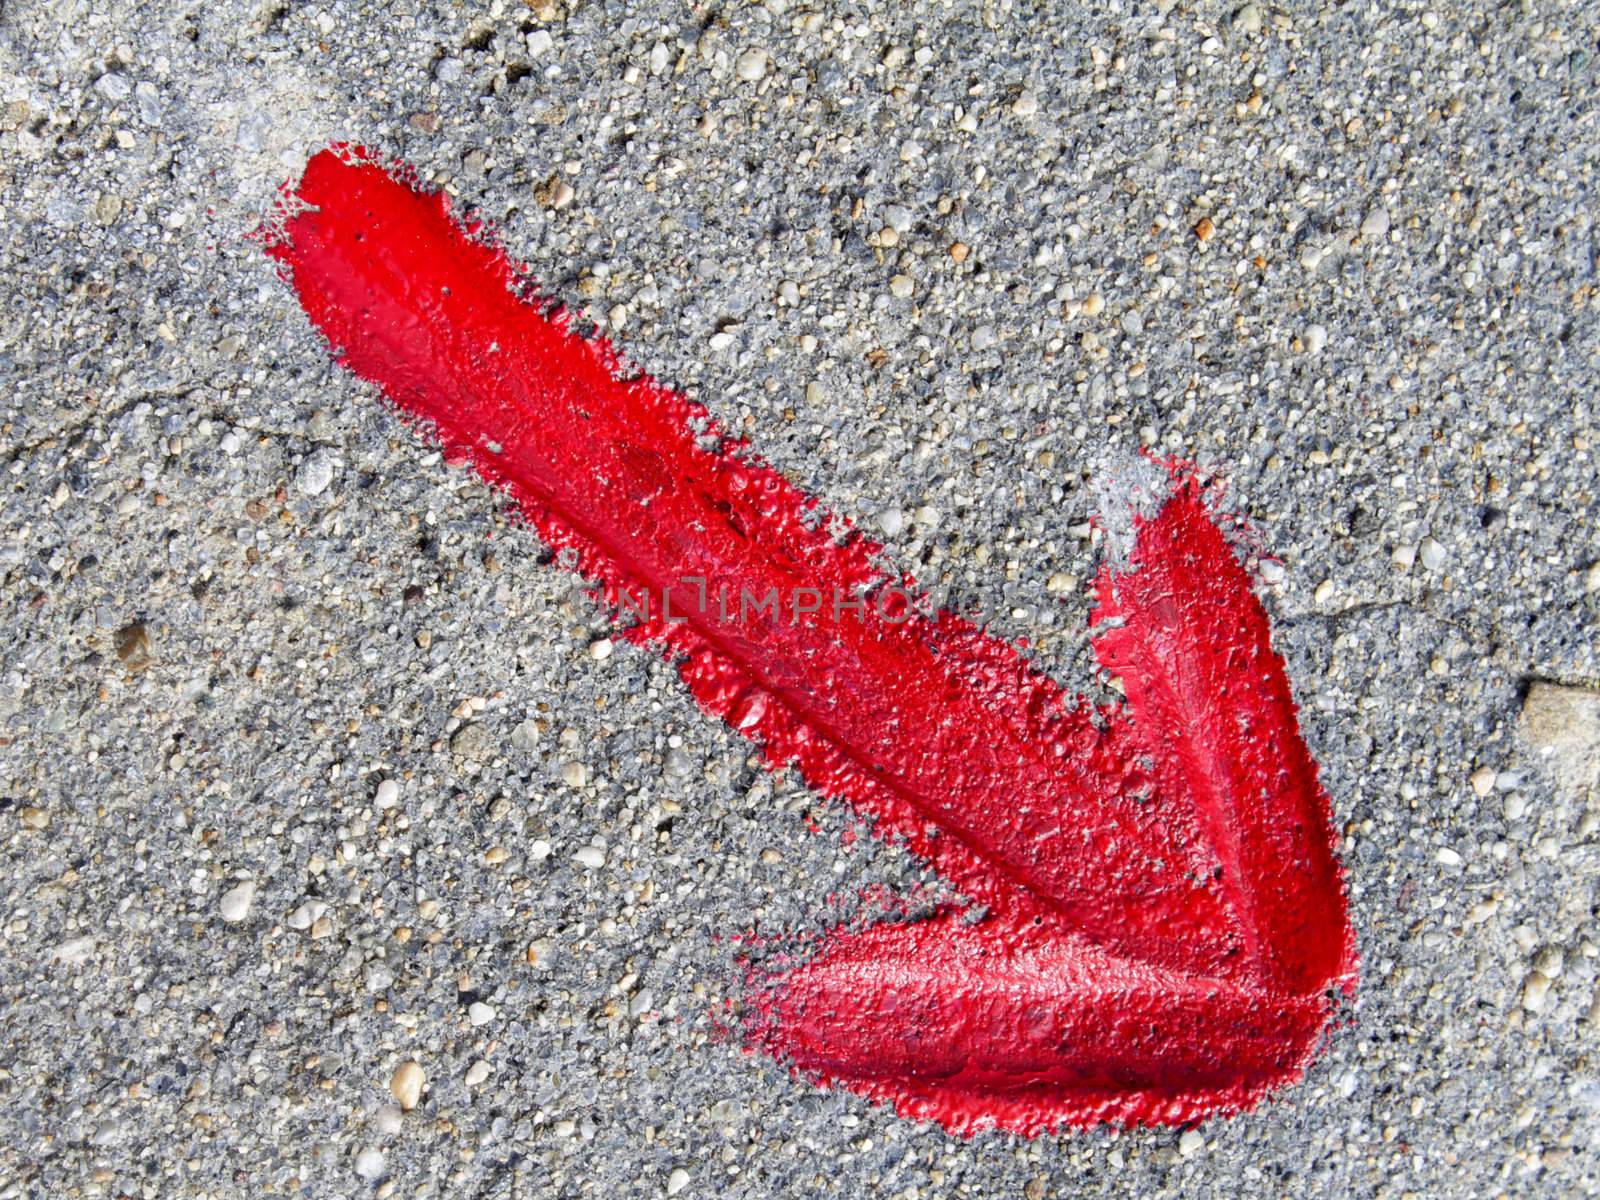 Red arrow pointing to the lower right corner, painted on asphalt